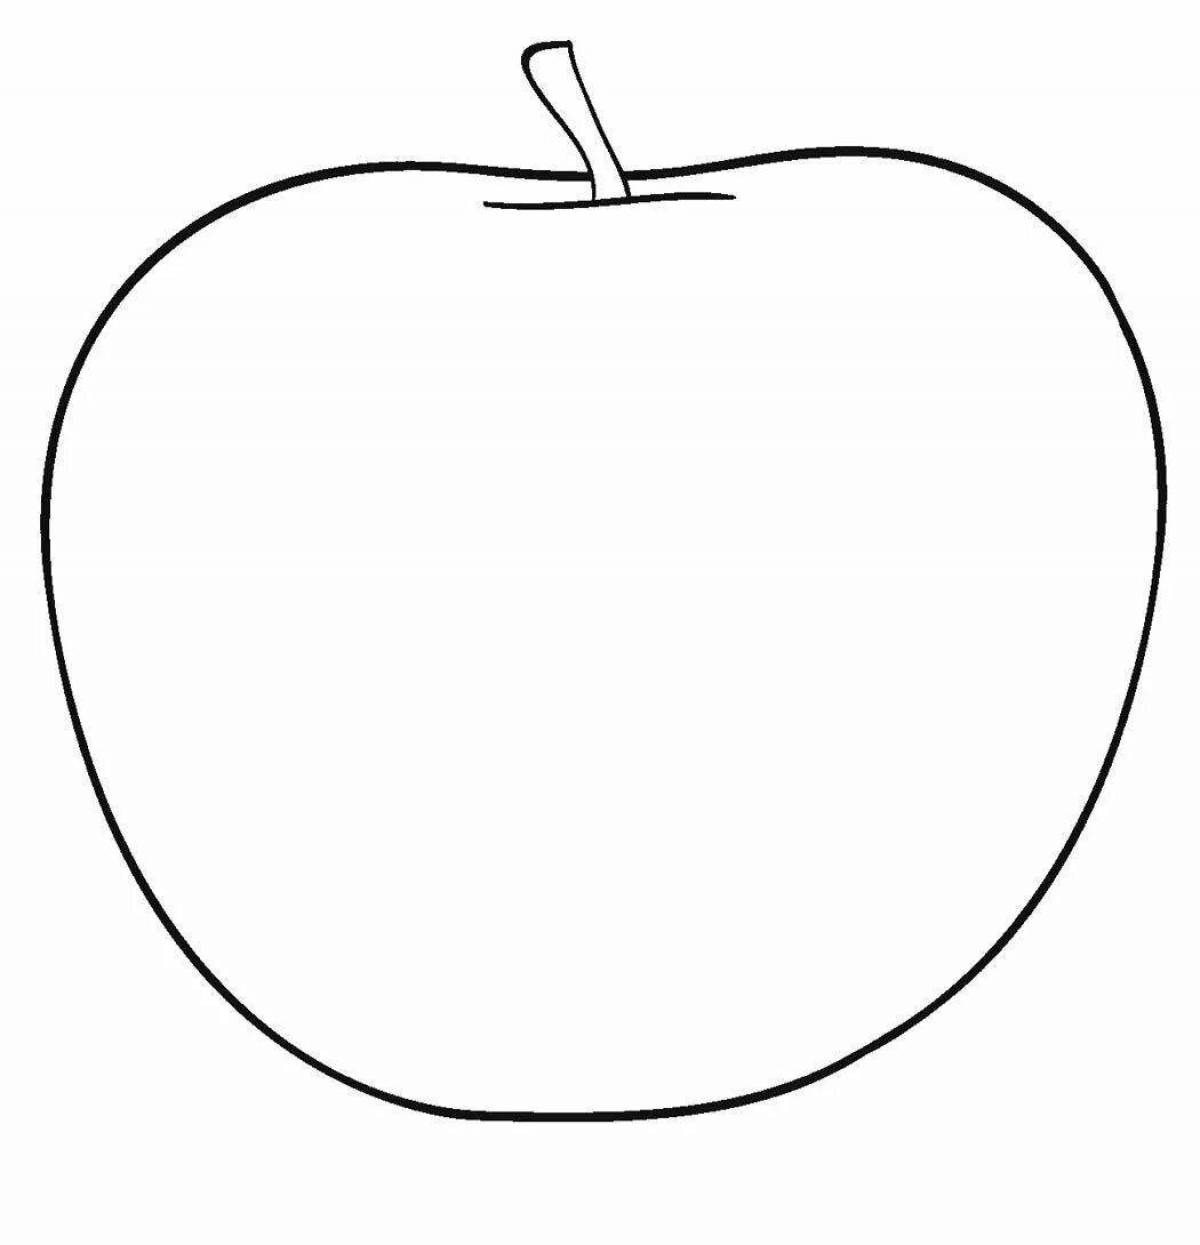 Clear apple coloring page